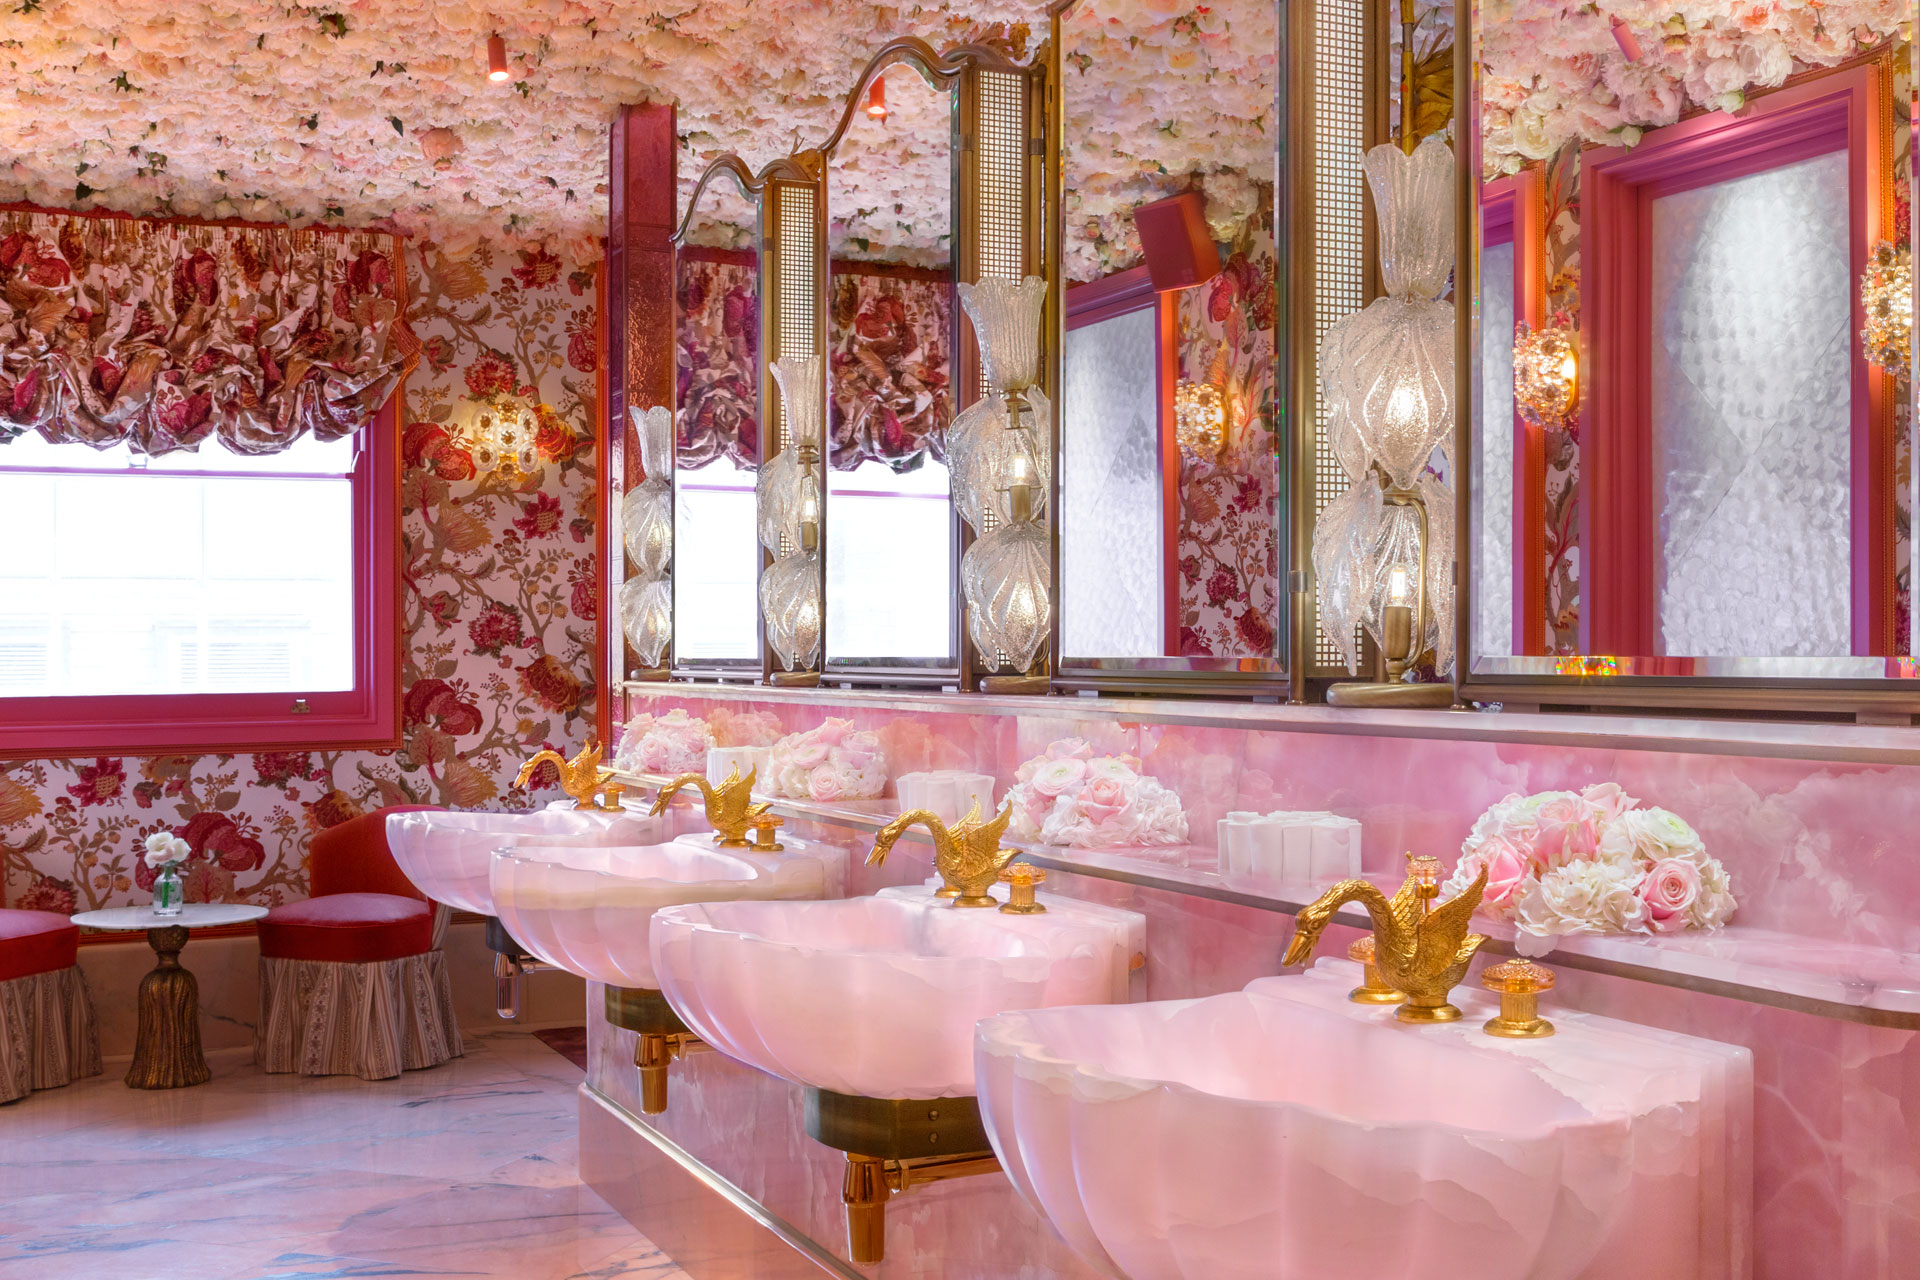 London’s Most Instagrammable Bathrooms